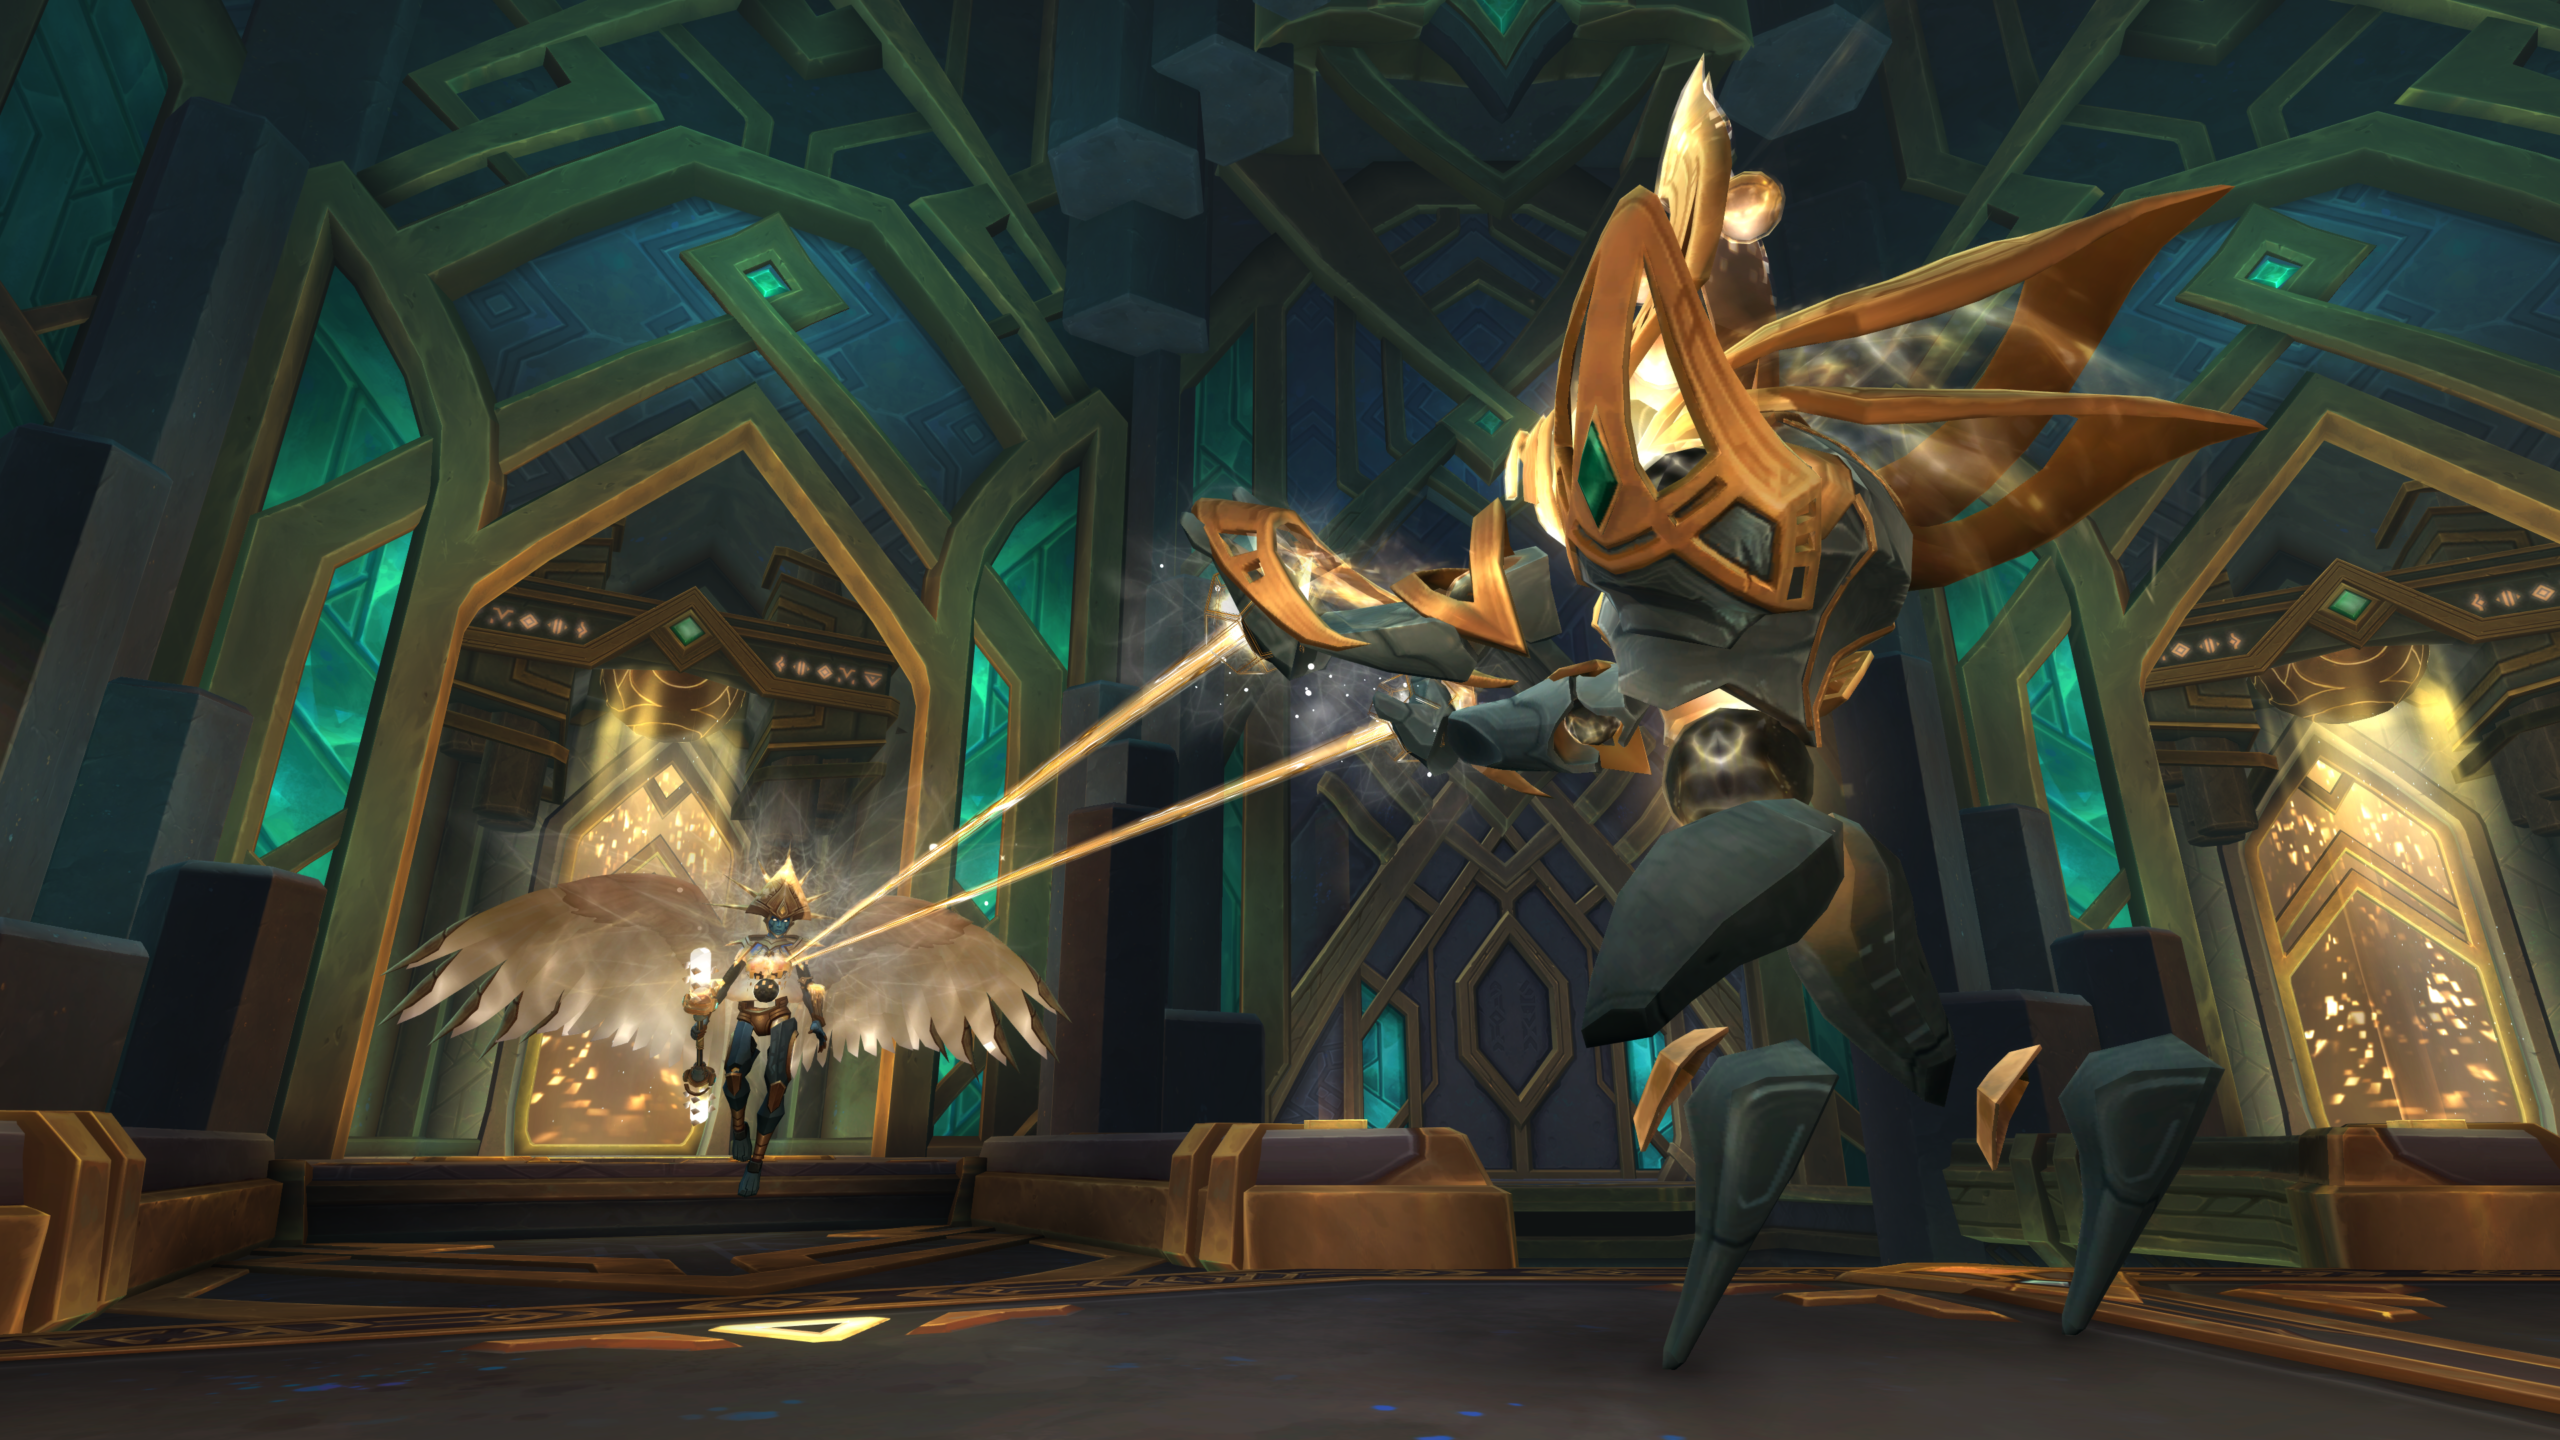 "Screenshot of a scene from World of Warcraft's Shadowlands expansion, showing the Eternity's End raid prototype with the Pantheon boss. The veil between life and death is depicted as being torn open, with a bright light shining through the rift."